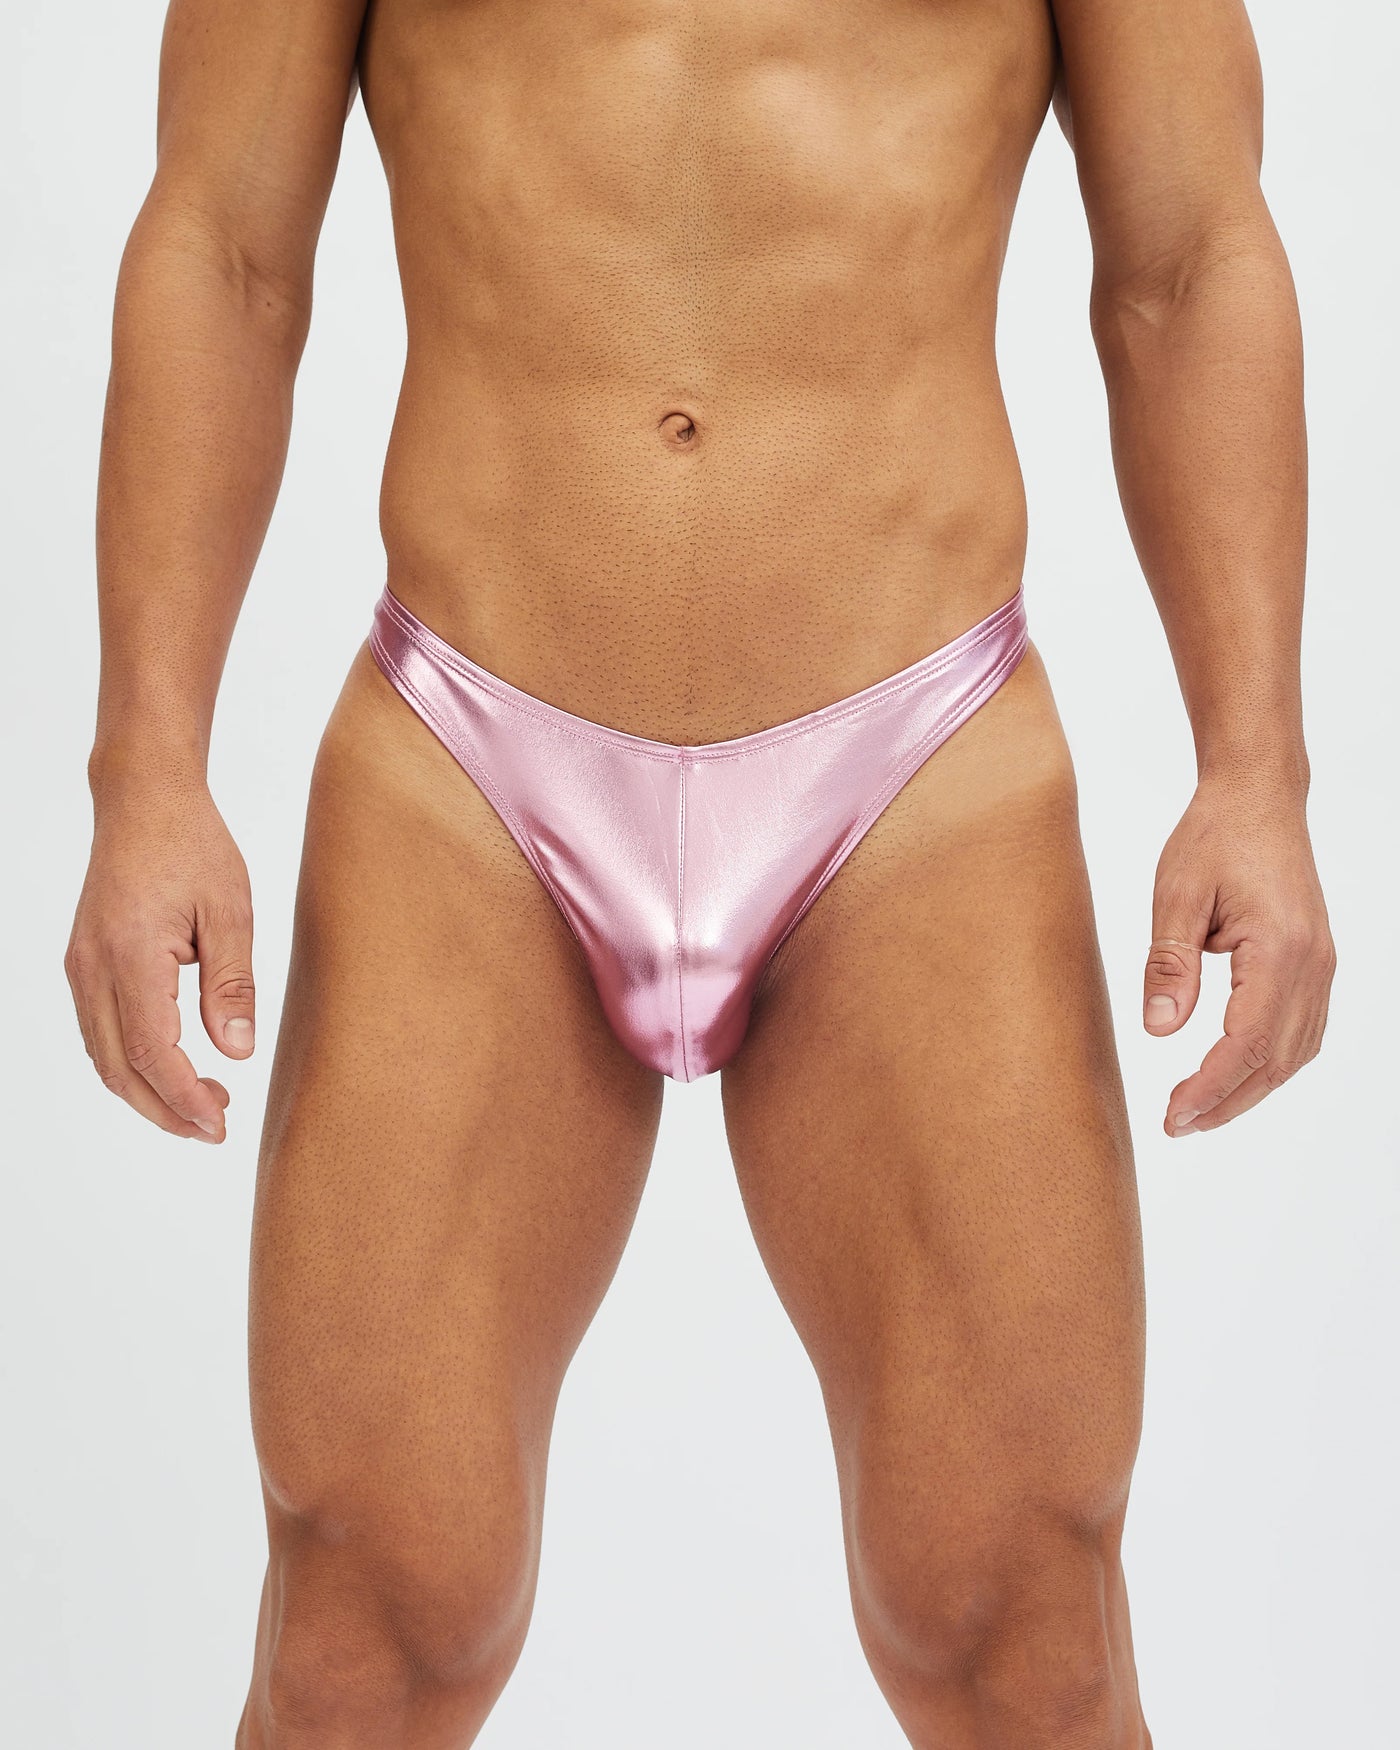 Project Claude Diamond Back Thong Pink